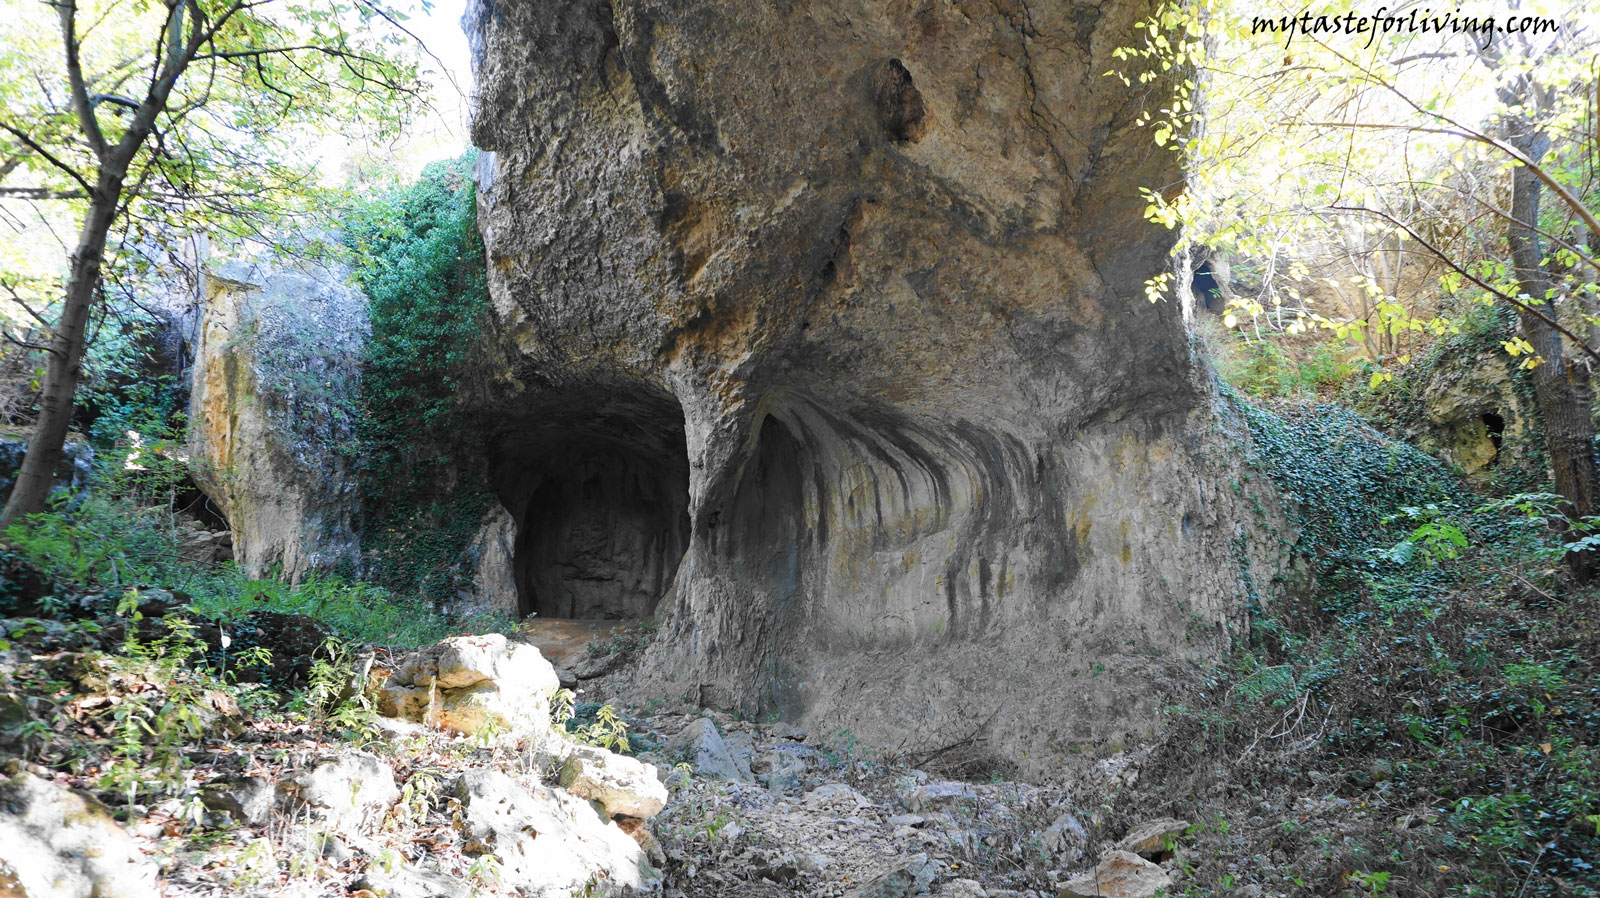 The rock maze or Peshketo cave is located near the village of Lilyache, Vratsa district. It represents an astonishing tangle of rock forms, bridges, holes, shaped passages and small caves.